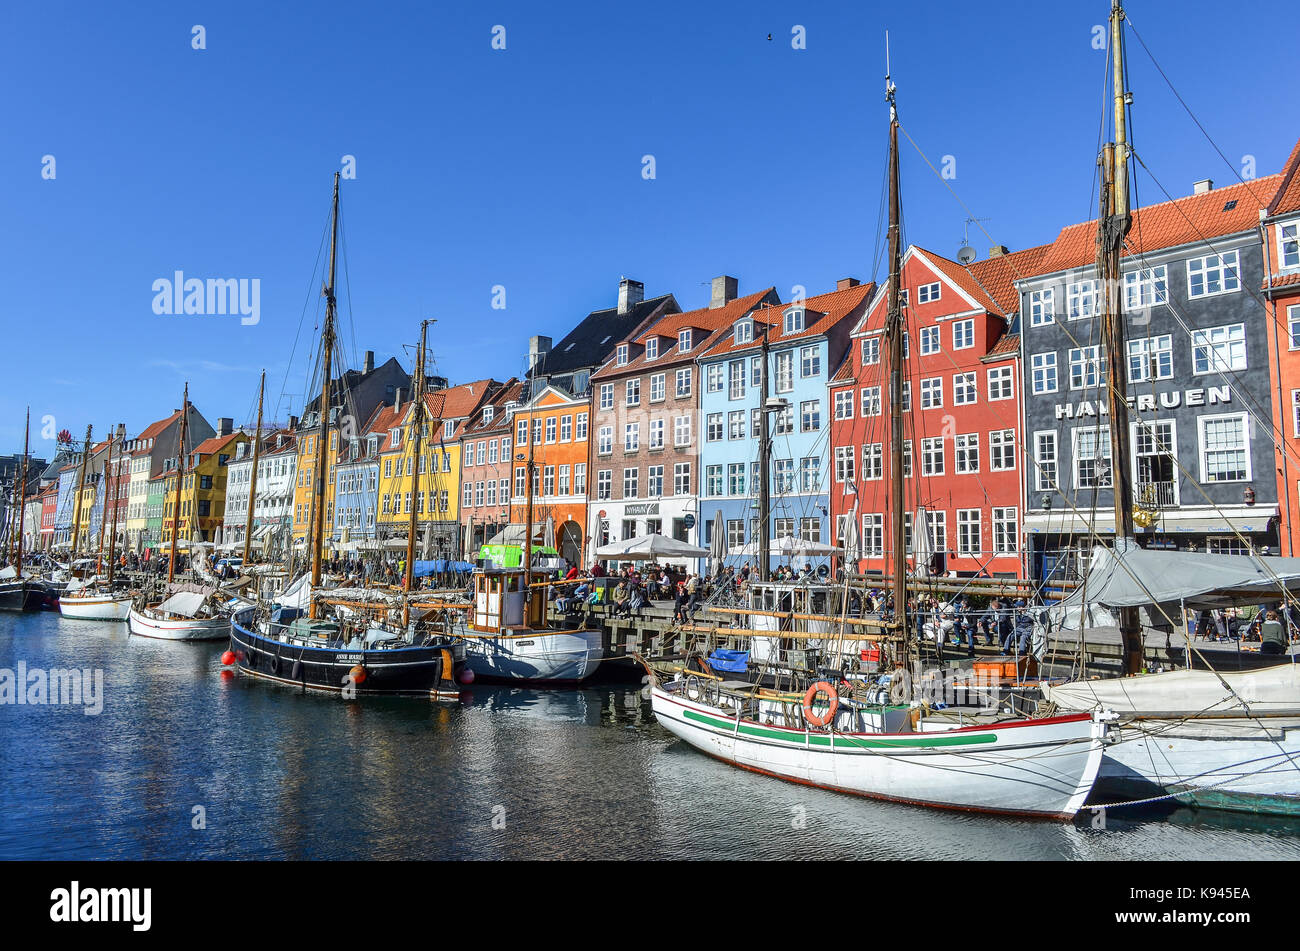 Nyhavn, the 17th century waterfront with row of colourful historic ...